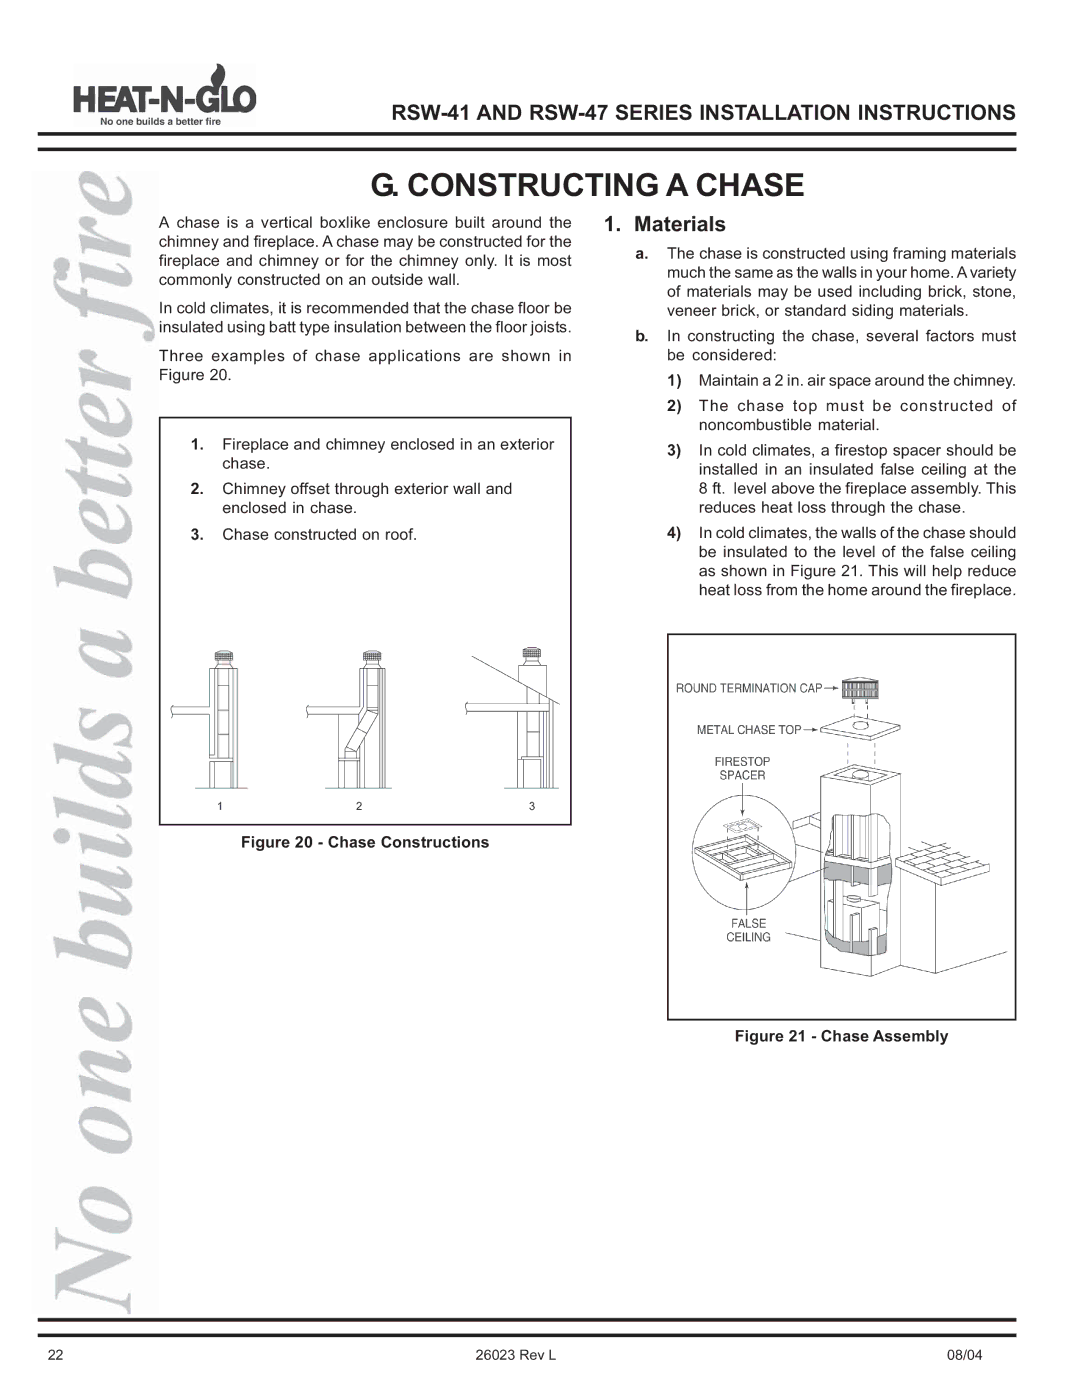 Hearth and Home Technologies RSW-41, RSW-47 manual Constructing a Chase, Materials 